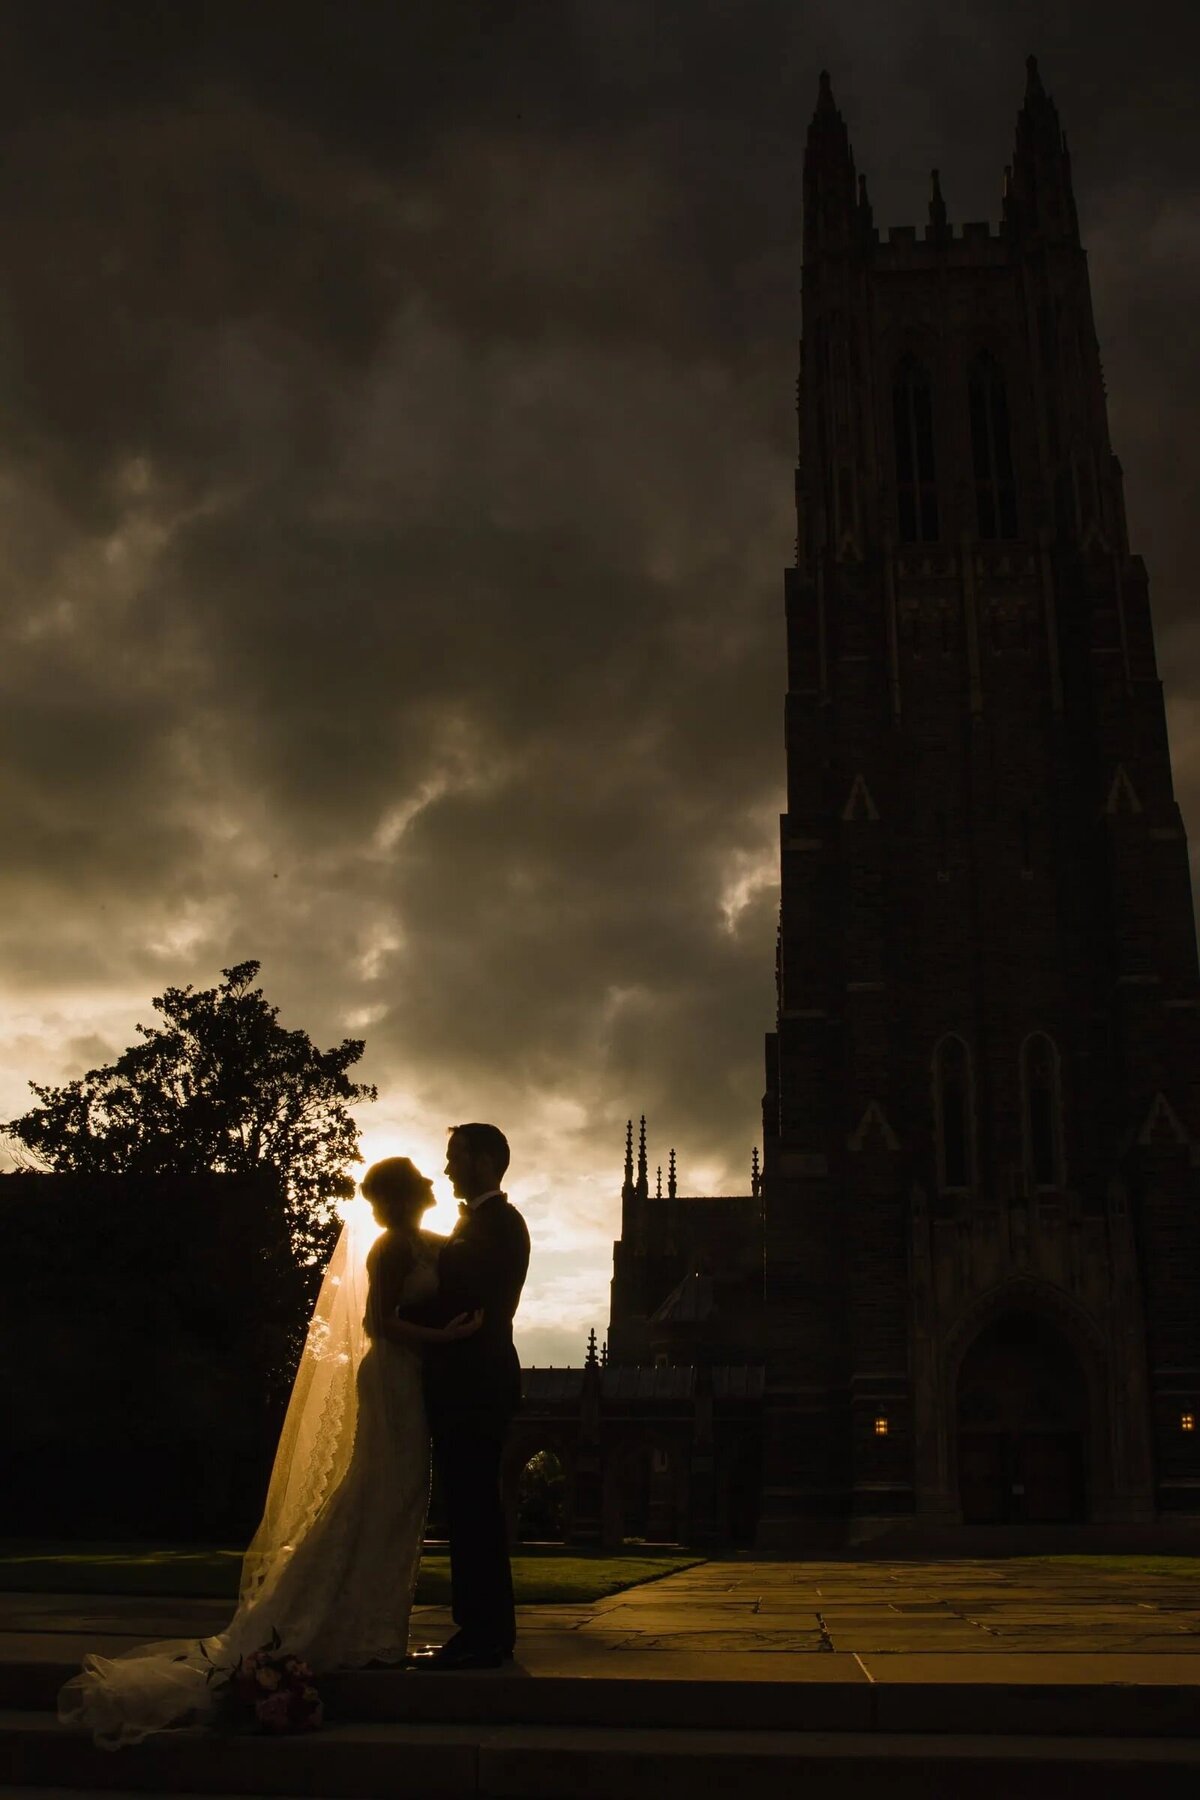 Silhouette of a bride and groom in front of the grand Duke Chapel at dusk, with the silhouette of the chapel accentuated against a cloudy sky